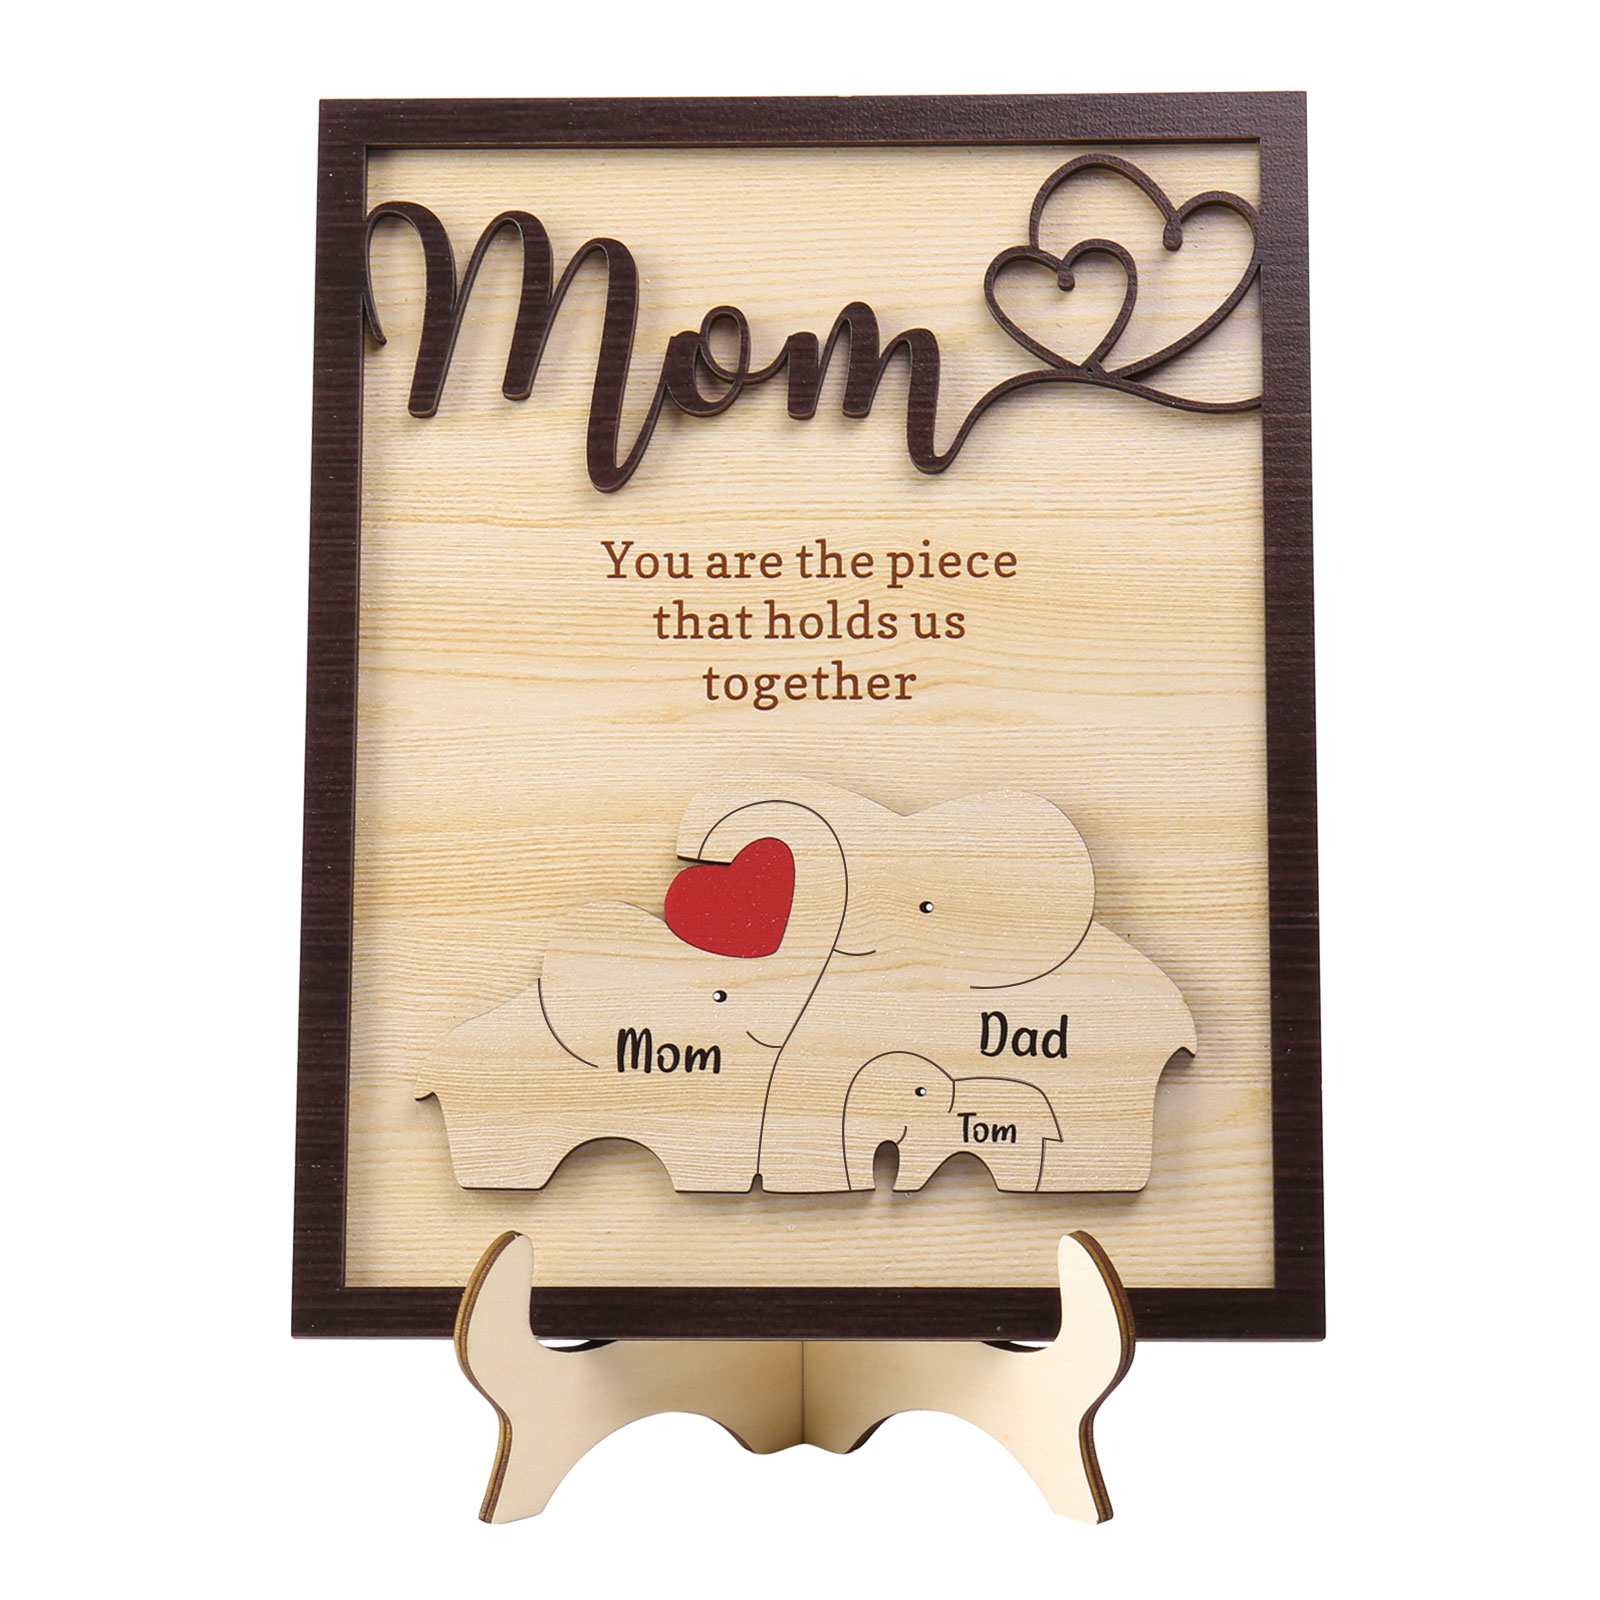 3 Names - Personalized Home Frame Wooden Ornaments Cute Elephant Style Ornaments for Mom